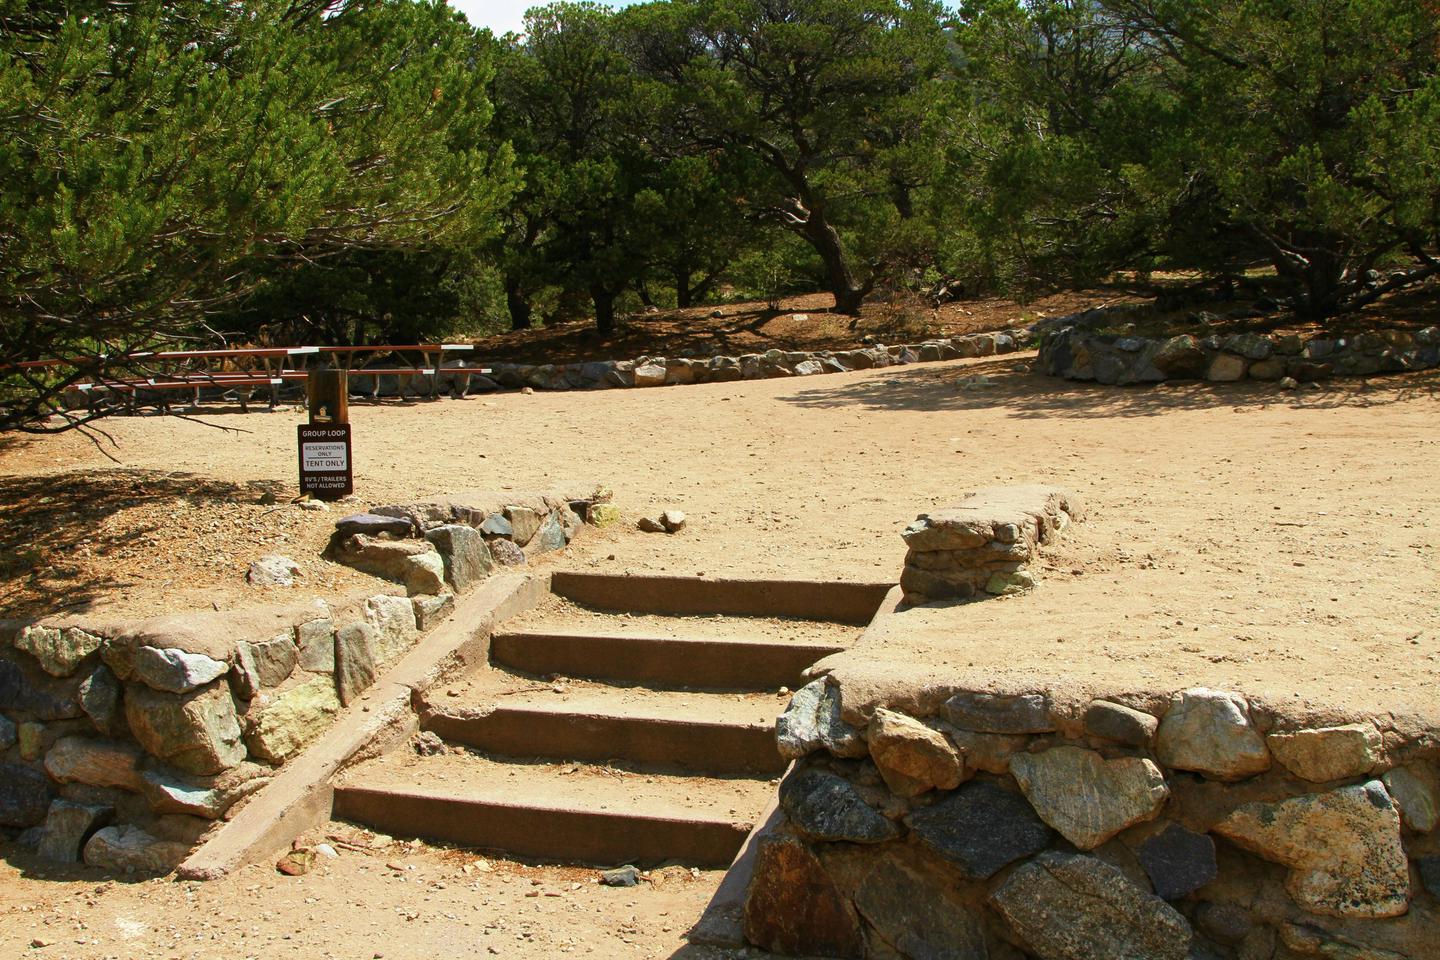 View of Group Site "B" tent area, showing stairs up from parking area to site. Picnic tables can be seen in the background.Group Site B, Pinon Flats Campground